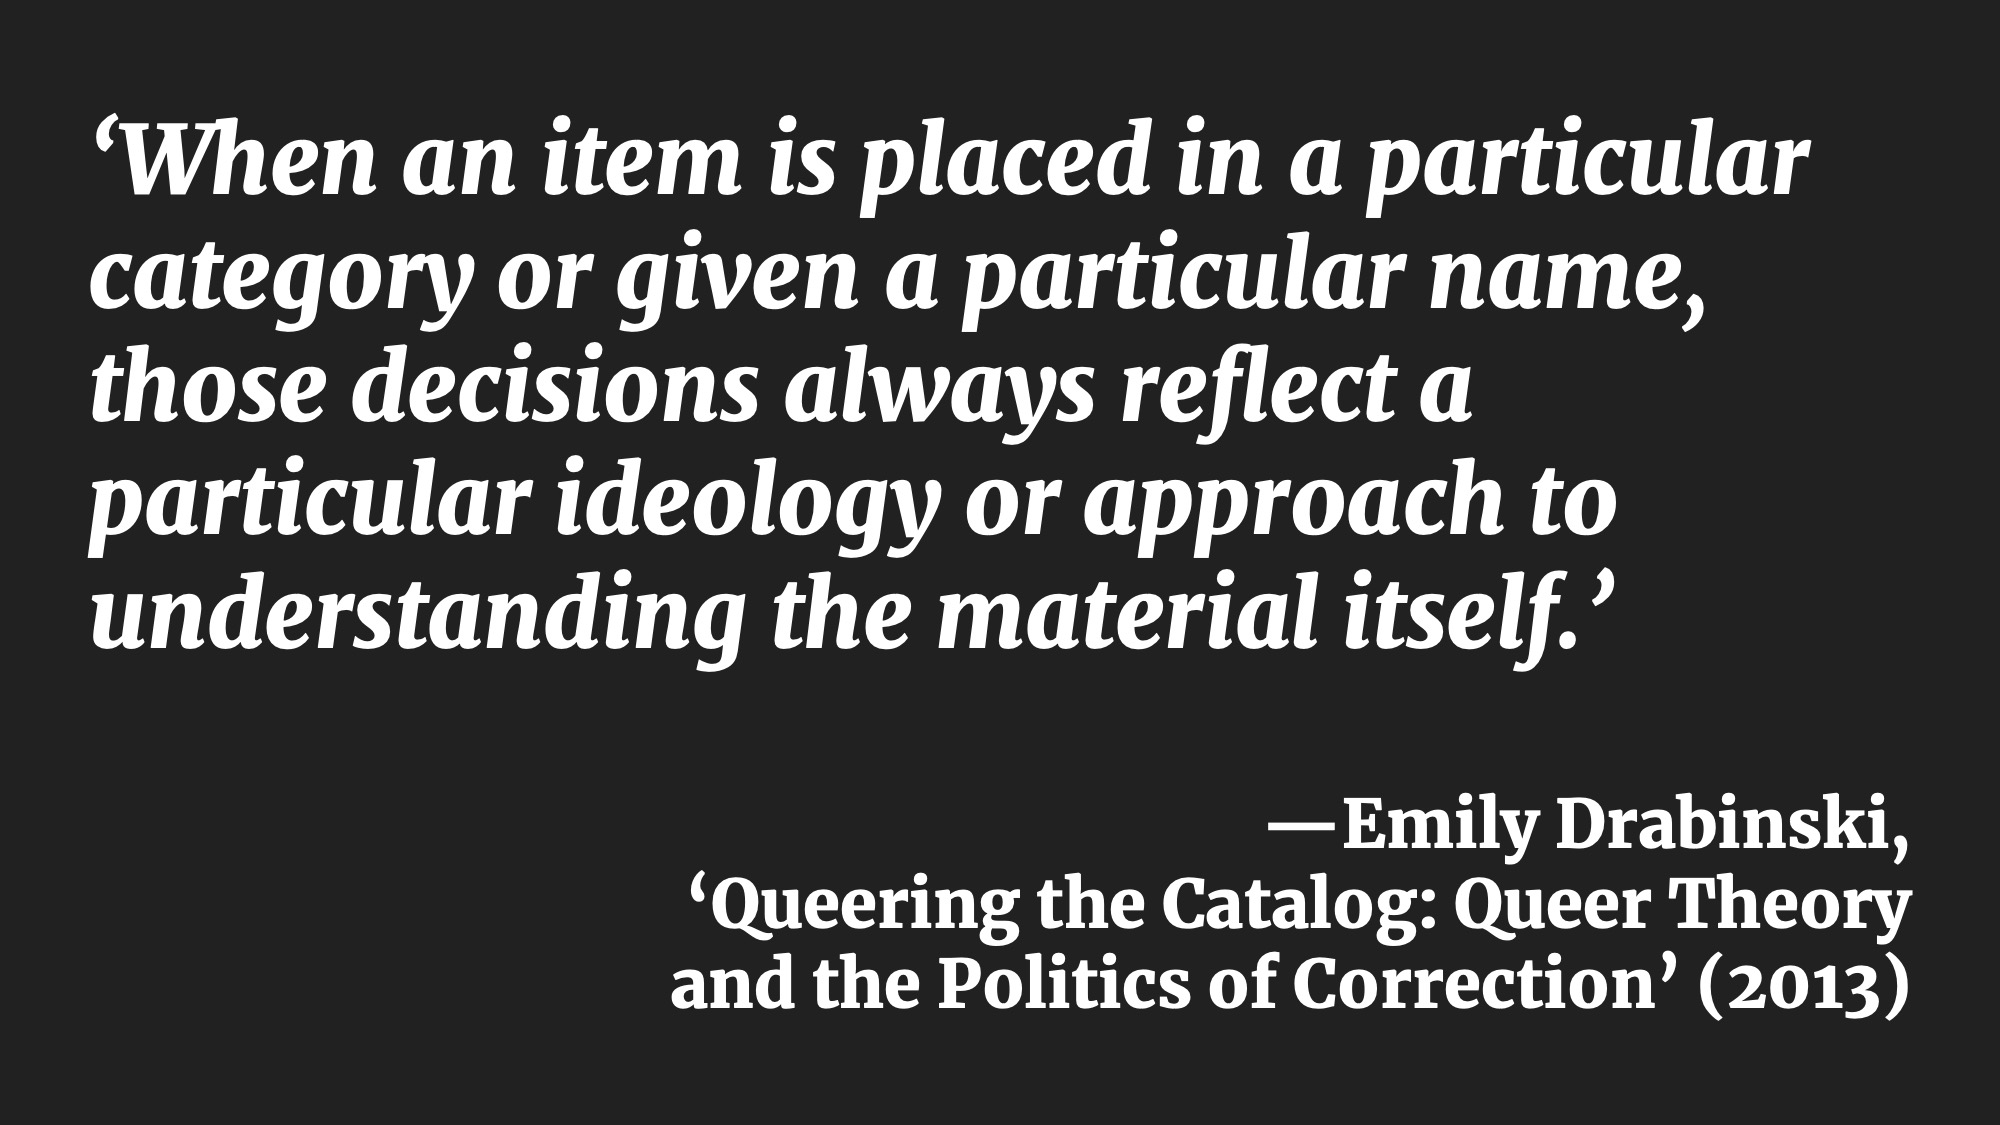 ‘When an item is placed in a particular category or given a particular name, those decisions always reflect a particular ideology or approach to understanding the material itself.’ —Emily Drabinski, ‘Queering the Catalog: Queer Theory and the Politics of Correction’ (2013)